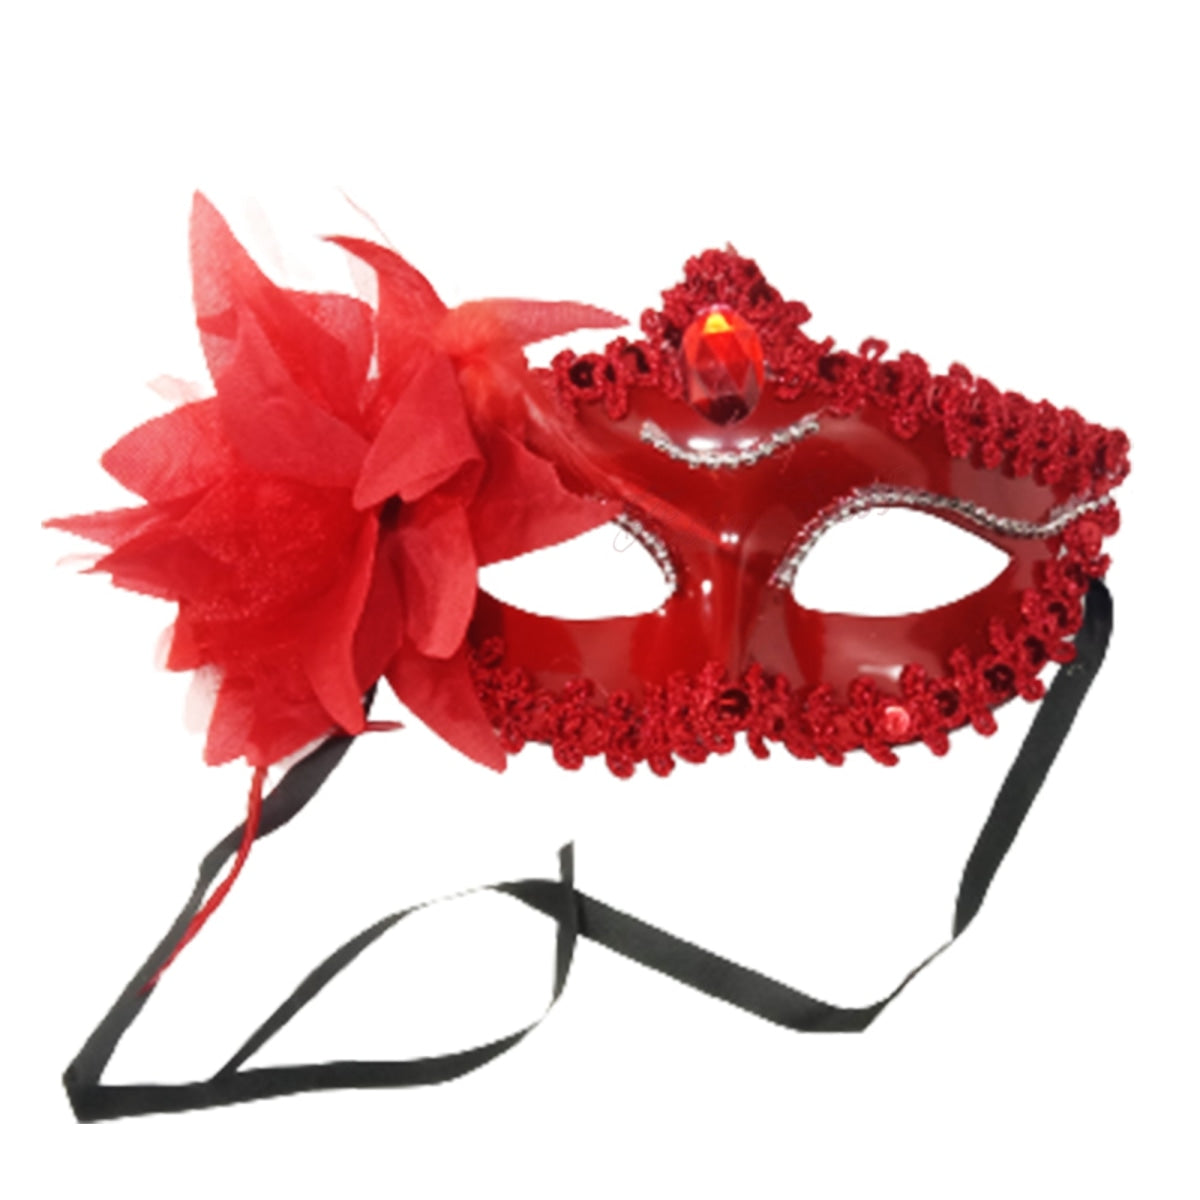 Masquerade Diamond Venetian Mask Venice Feather Wedding Carnival Party Costume Red Masks